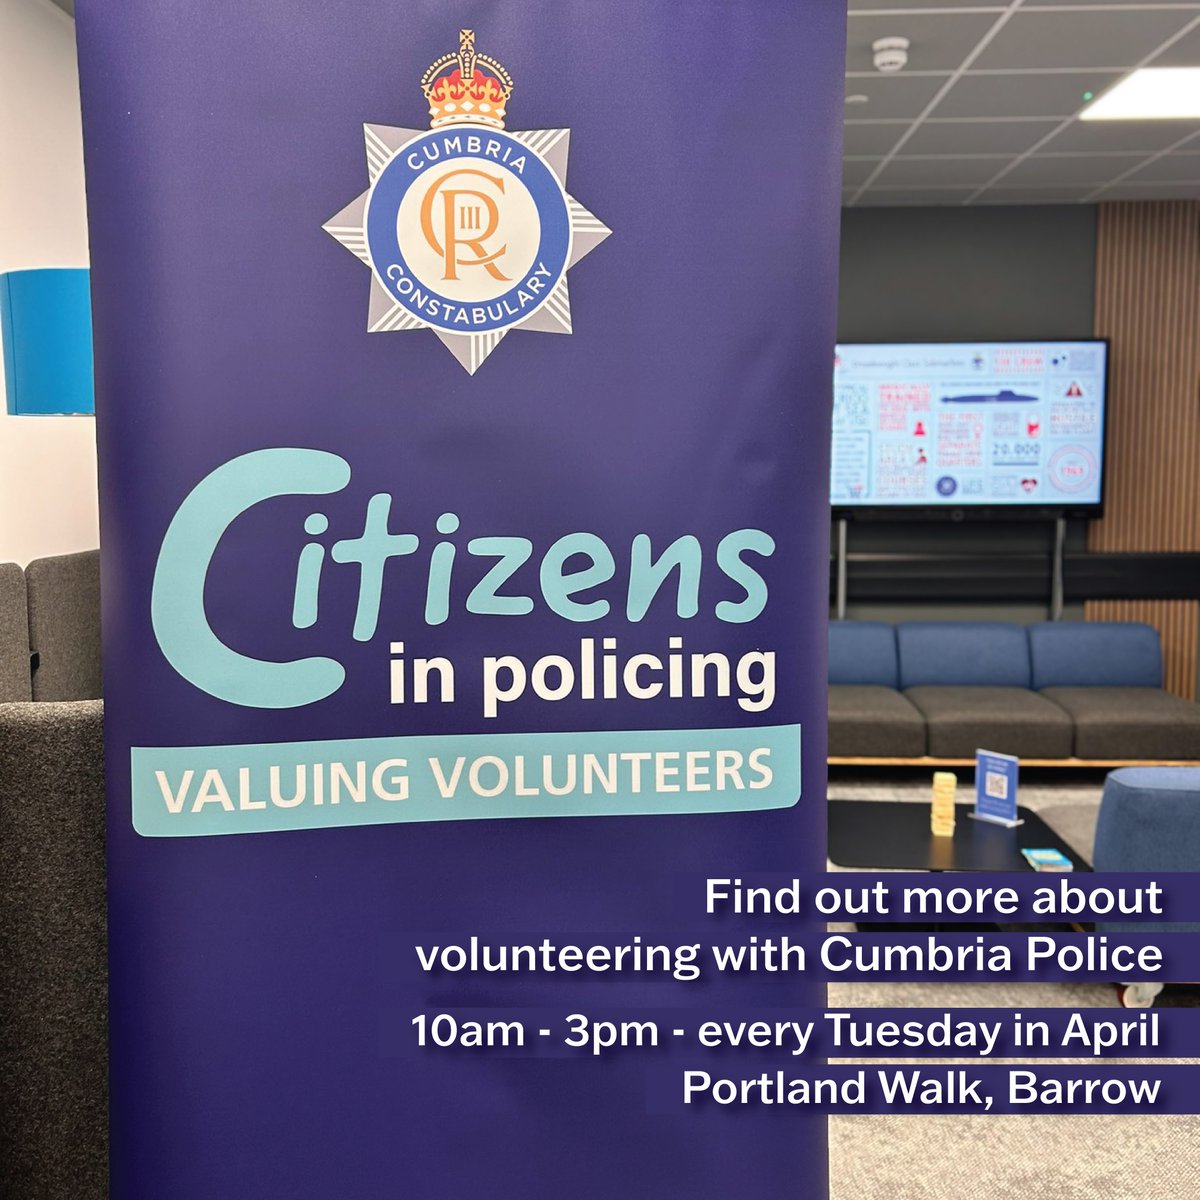 Our Citizens in Policing team are at the Career Inspiration Hub at Portland Walk, Barrow. Come and visit them to find out more about volunteering with Cumbria Police.